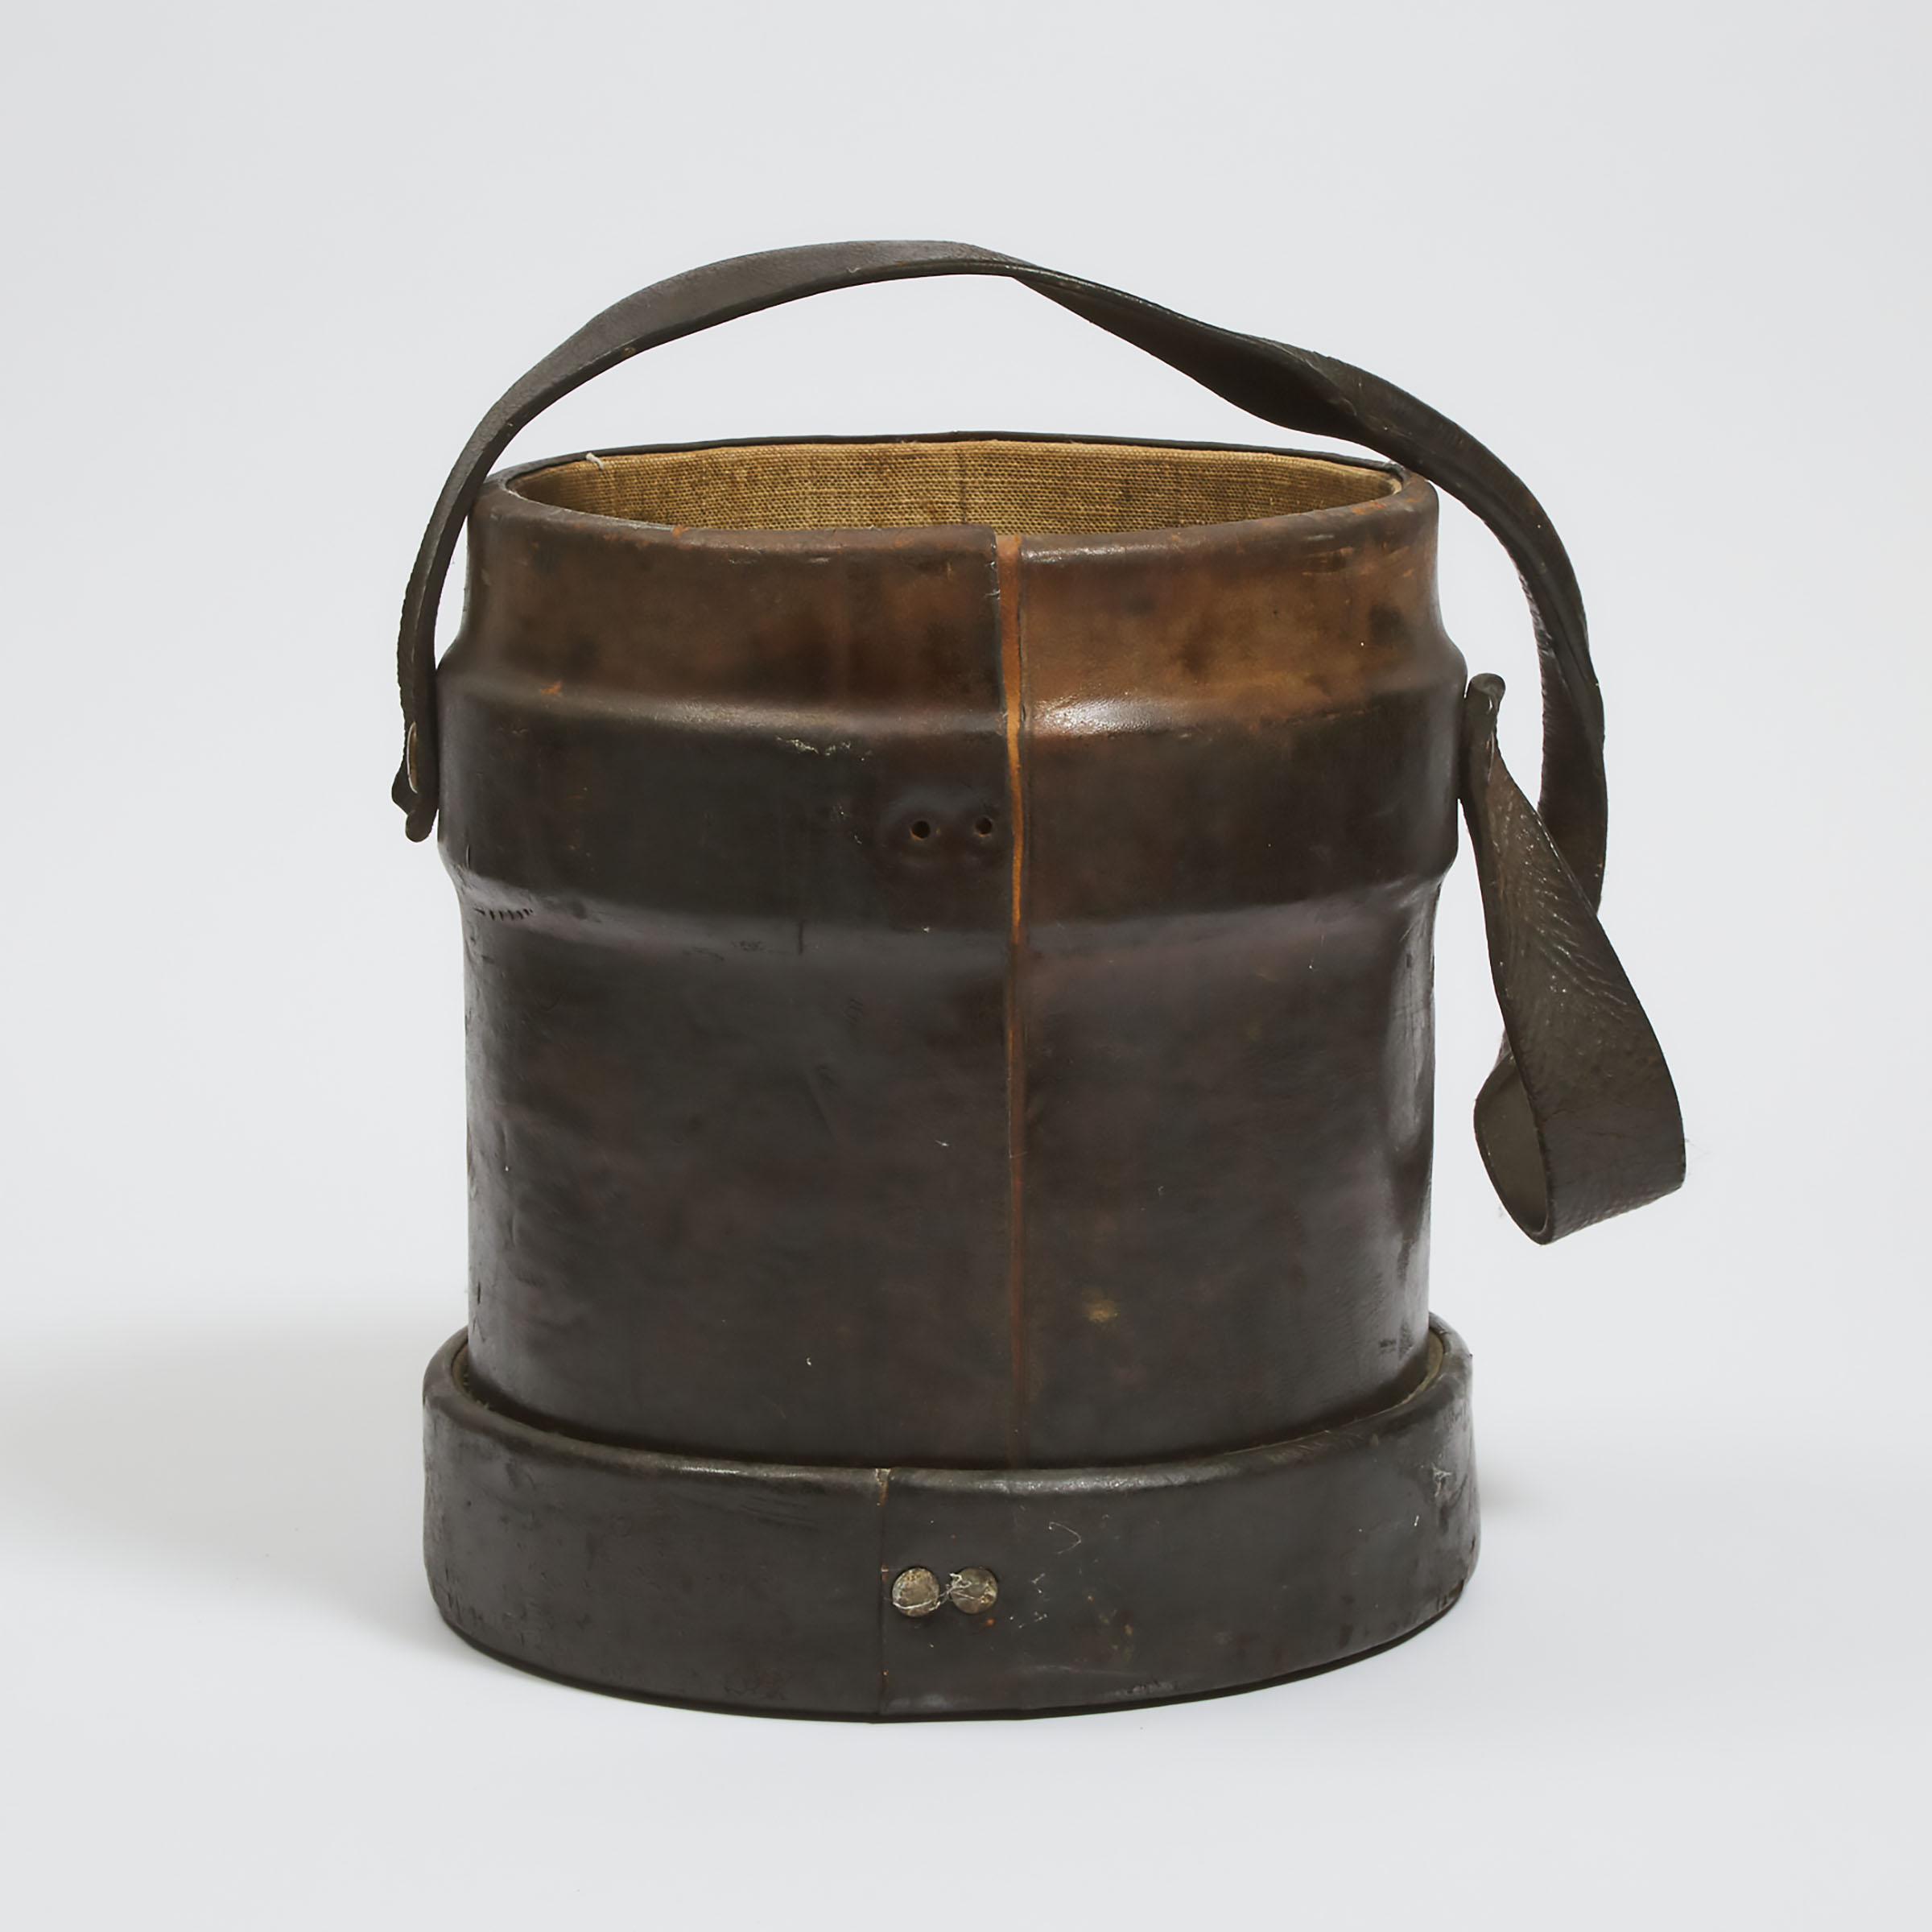 WWII British Royal Artillery Leather Shot Bucket, March, 1940